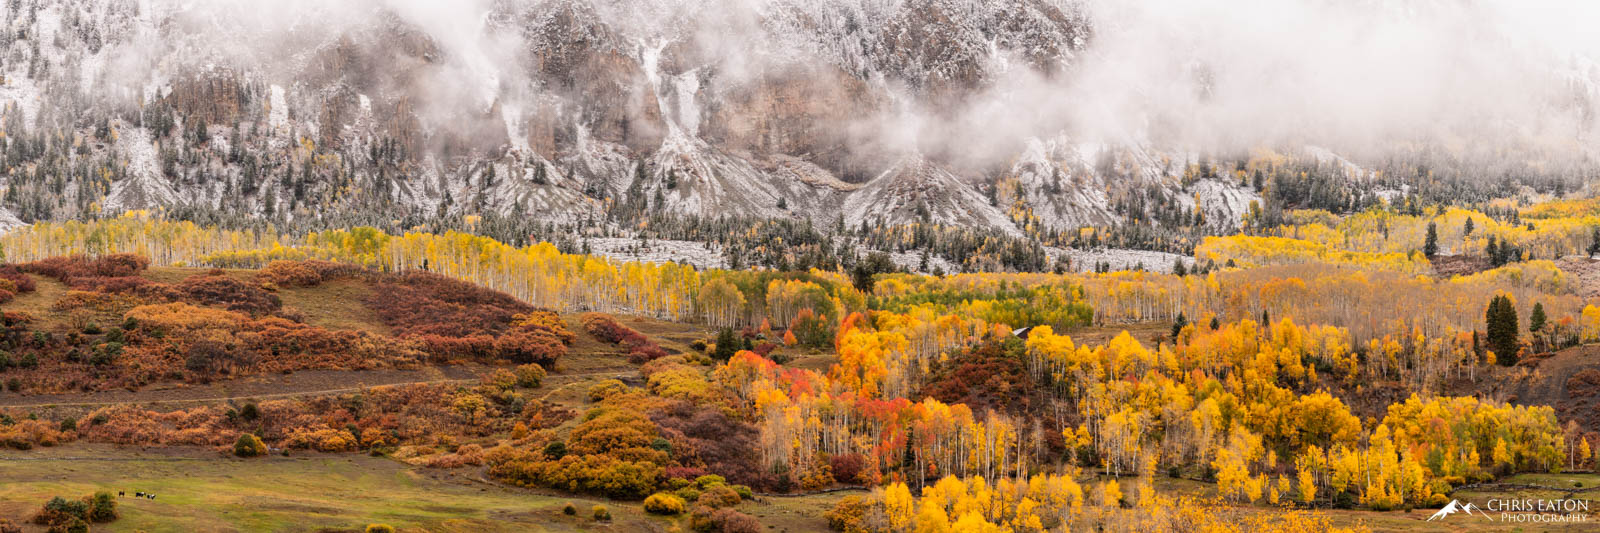 The seasons collide in the San Juan Moiuntains near Telluride, Colorado as an early winter storm coats the upper reaches of the...